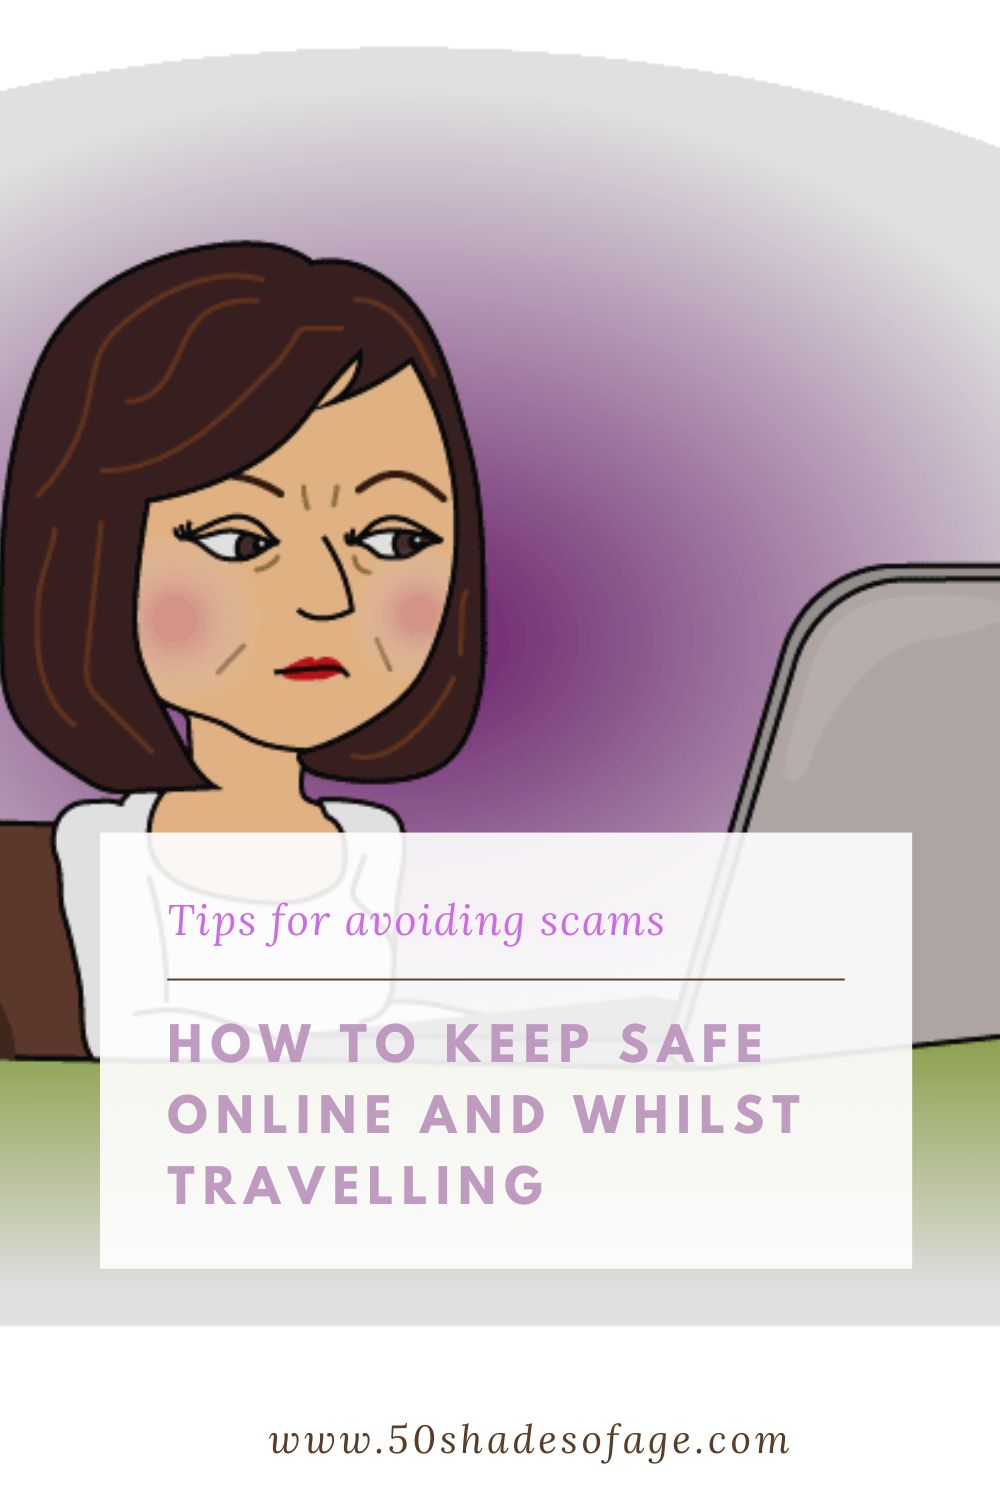 How to Keep Safe Online and Whilst Travelling